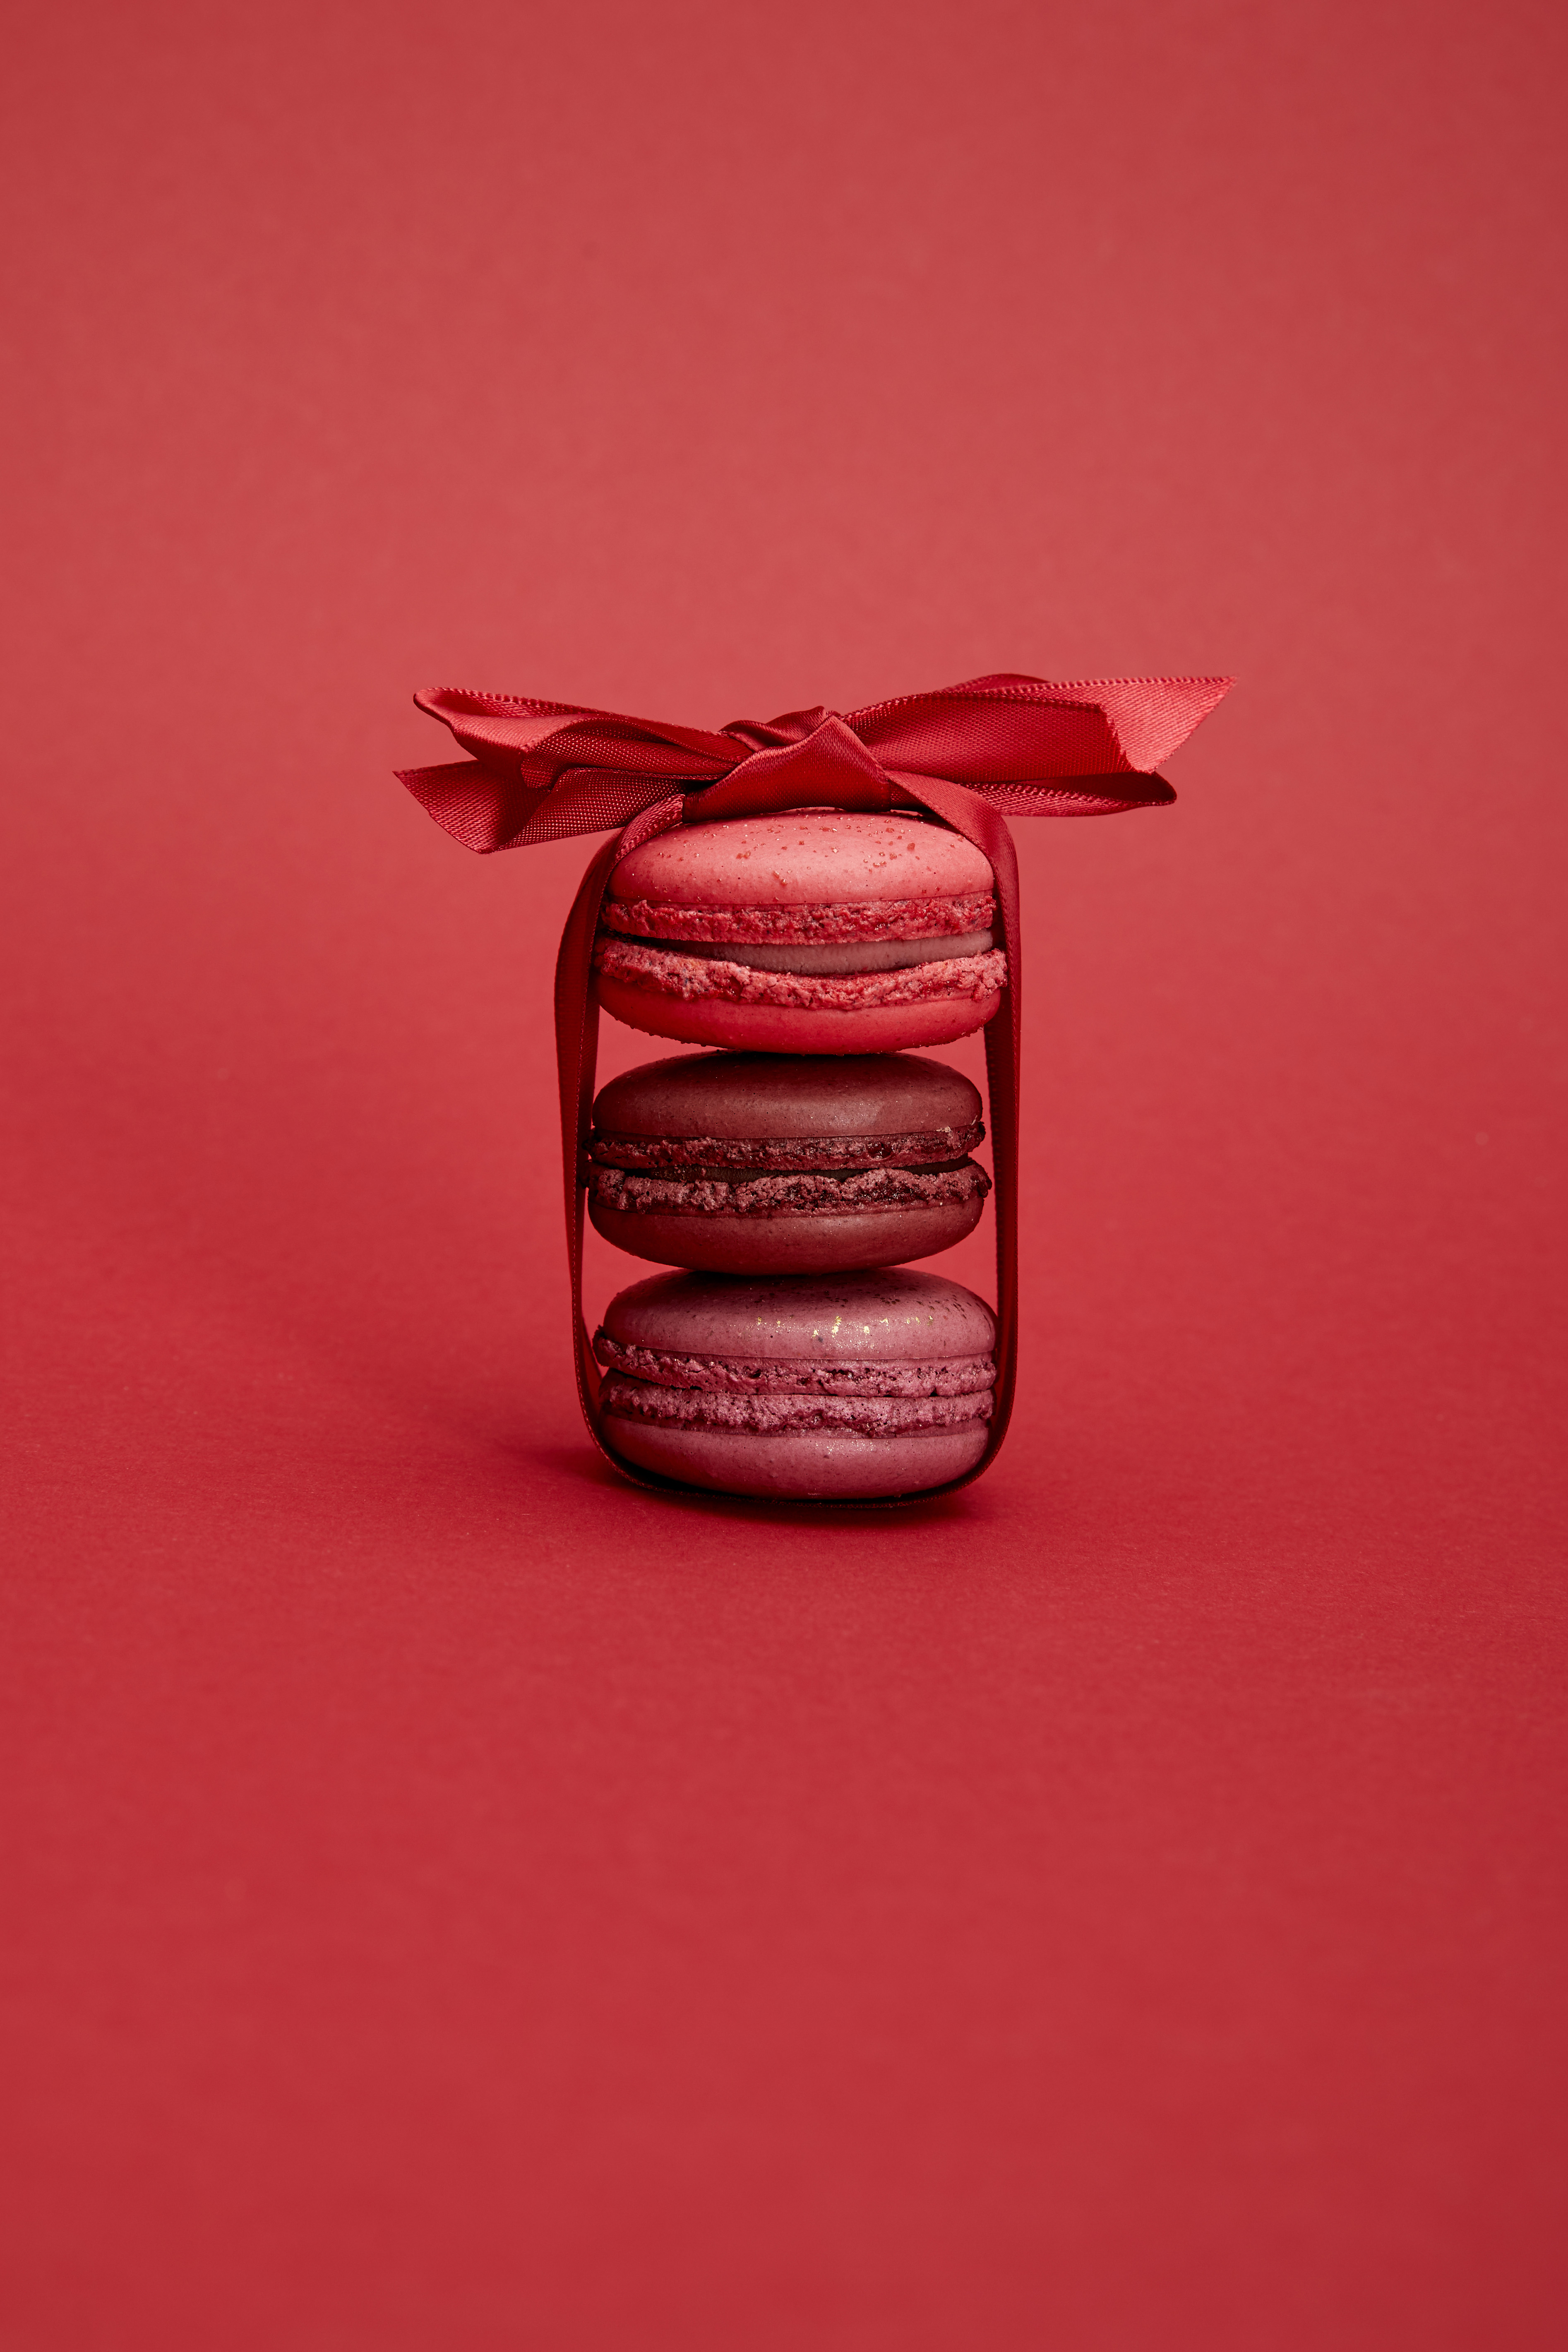 A trio of stacked macarons wrapped vertically with a red bow.